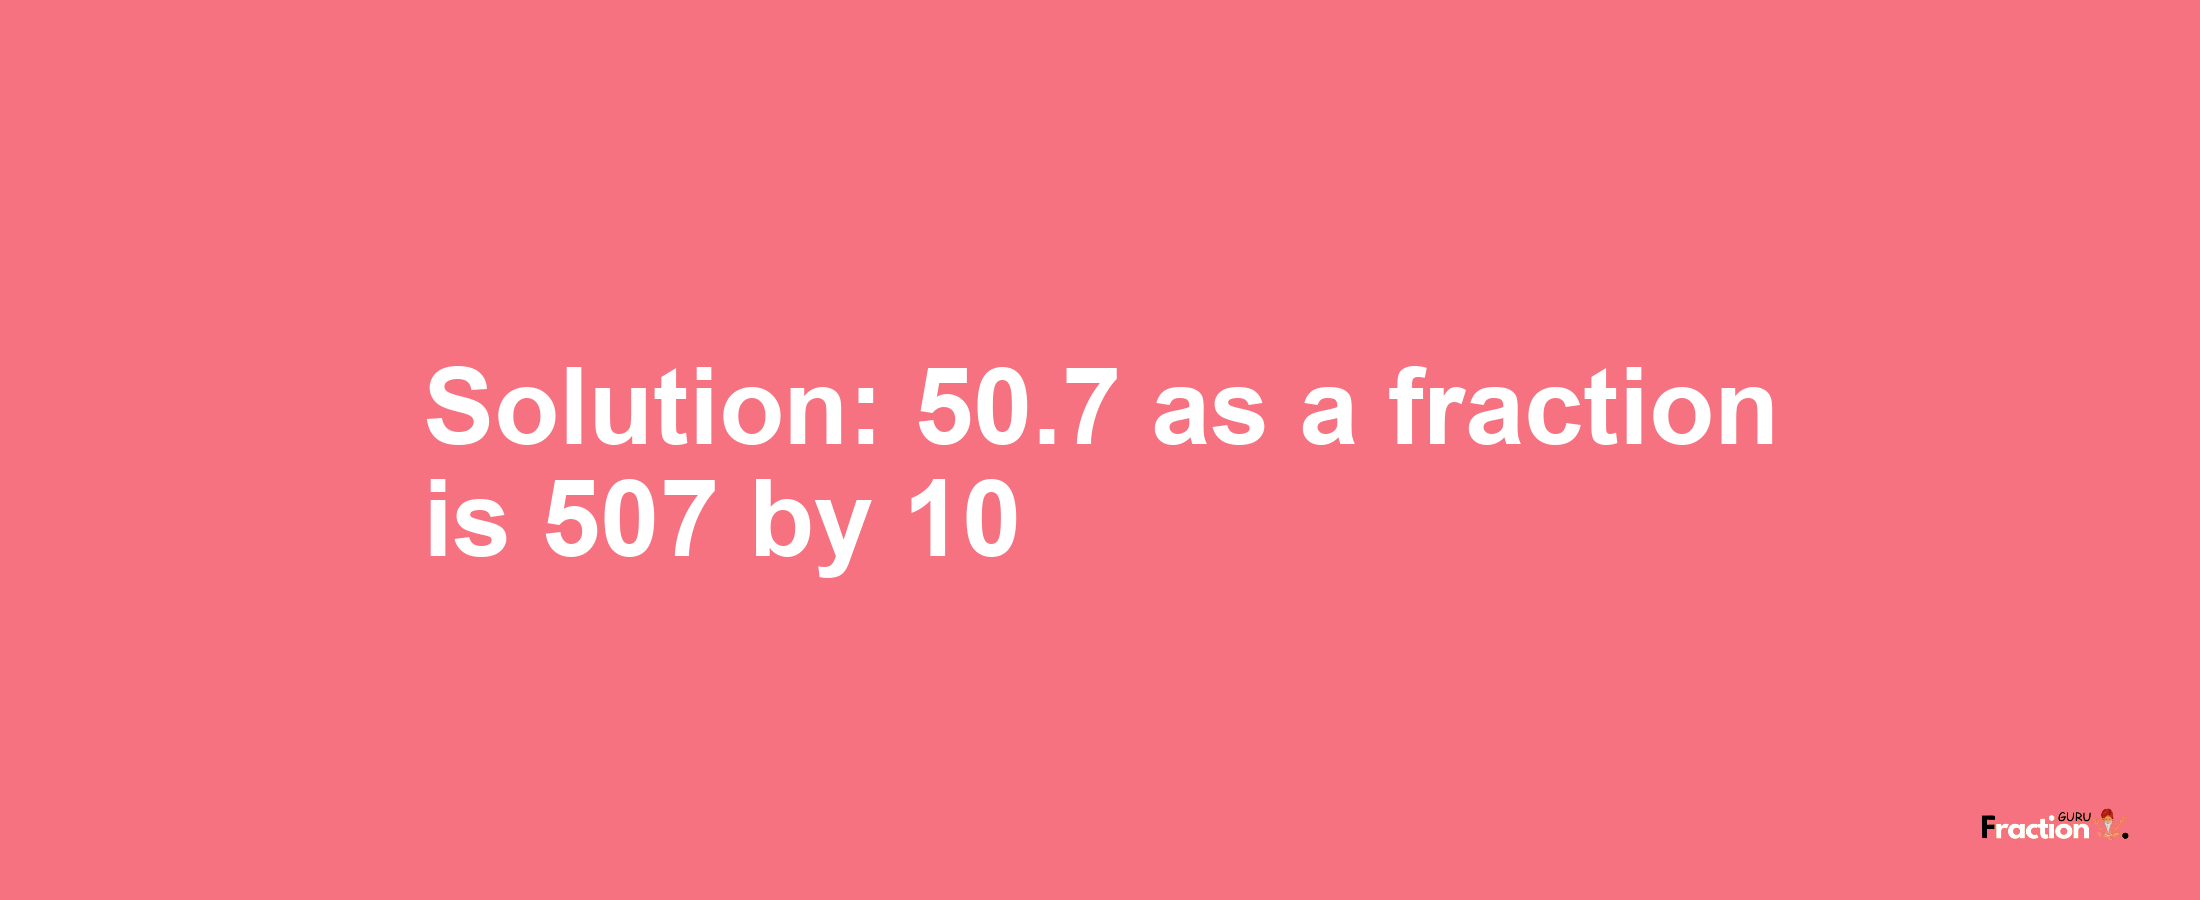 Solution:50.7 as a fraction is 507/10